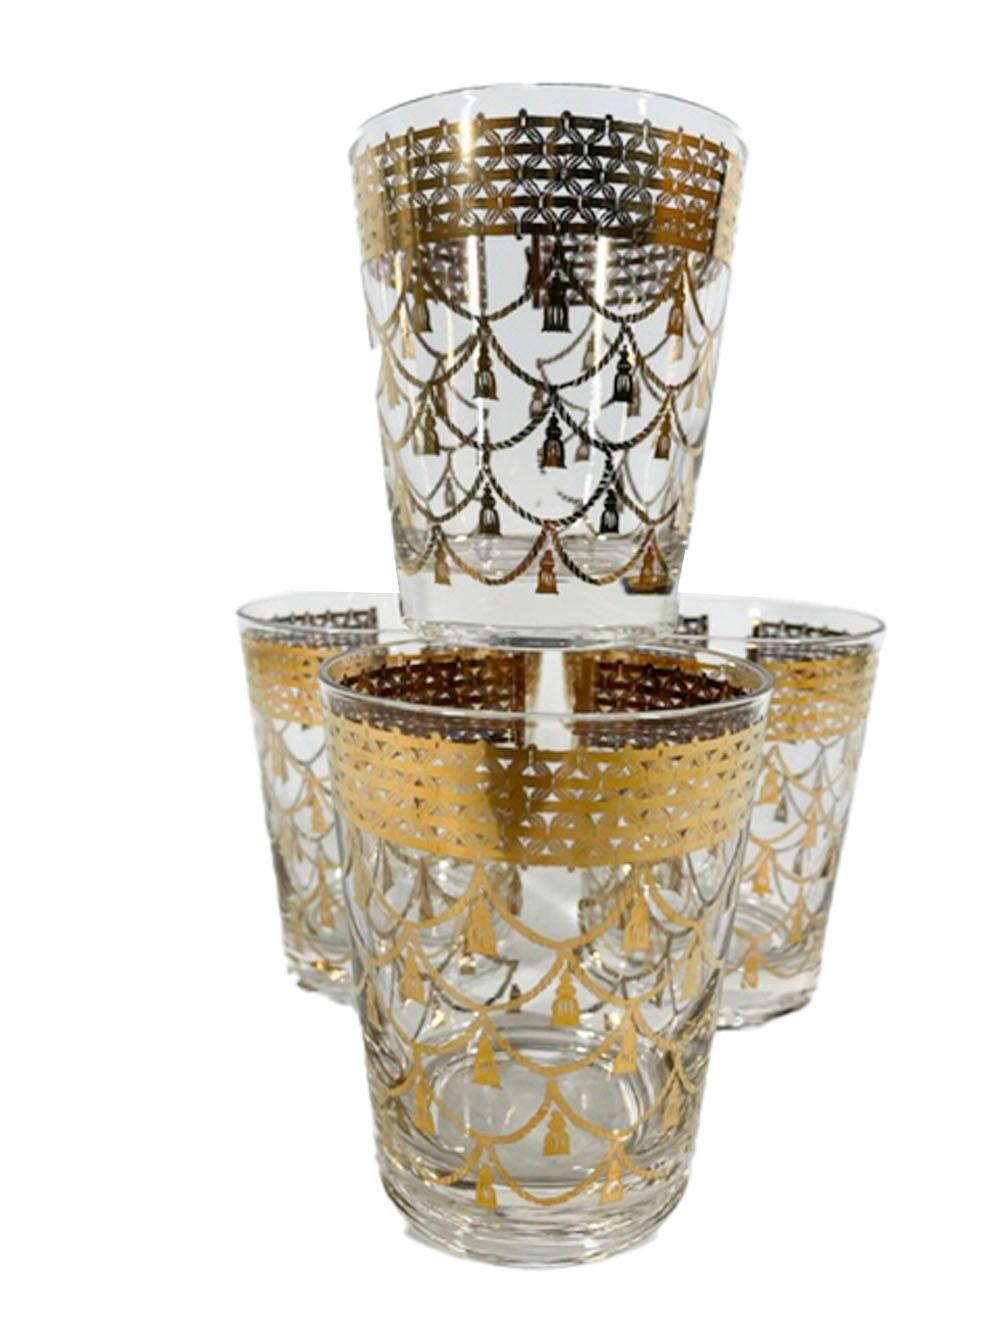 Four rare Mid-Century Modern double old fashioned glasses by Cera Glassware decorated in 22 karat gold with tasseled cords hanging from an openwork band with a gap and what appears to be a clasp, perhaps meant to depict a necklace.